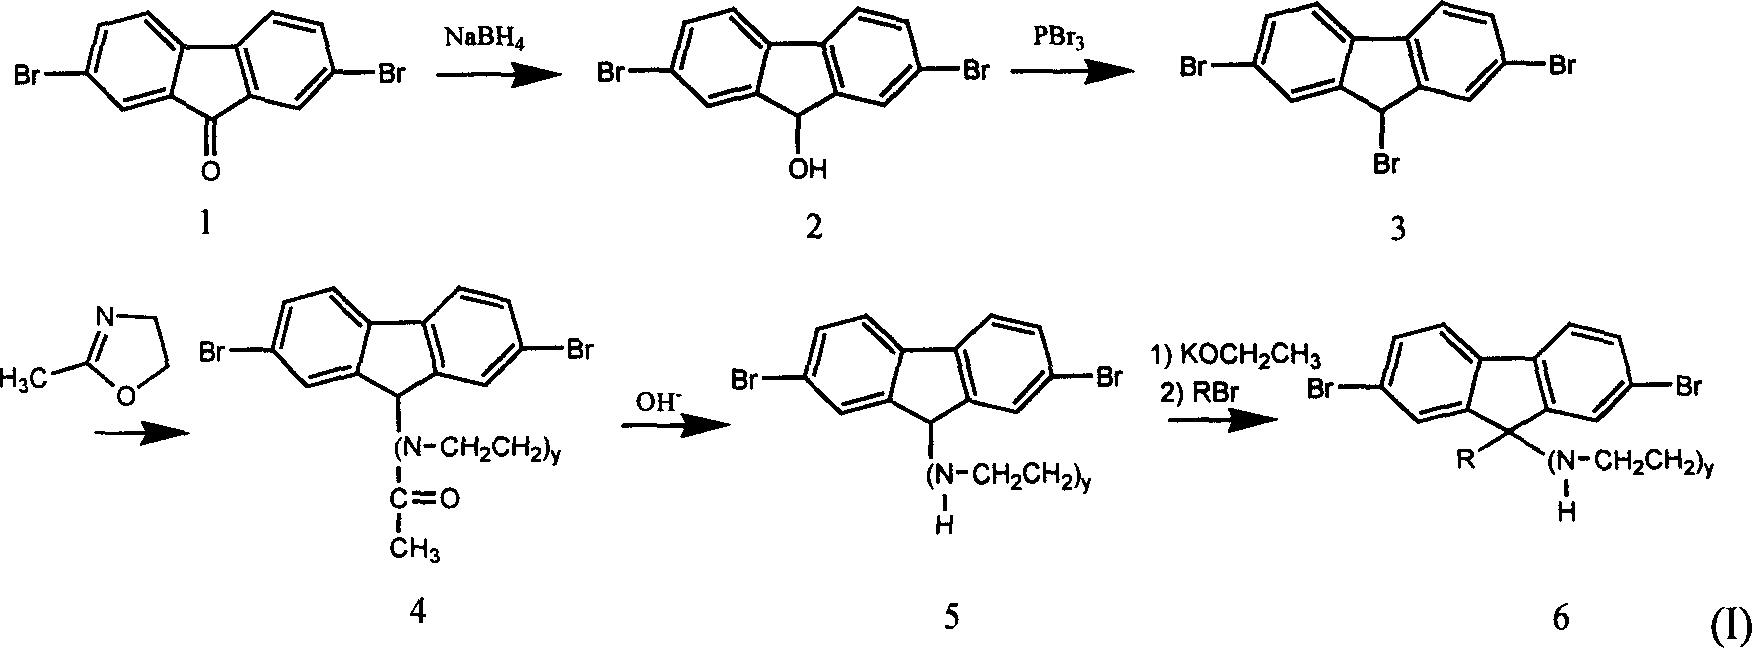 Fluorene water soluble conjugate polymer containing polyethyene diamine side chain and its use